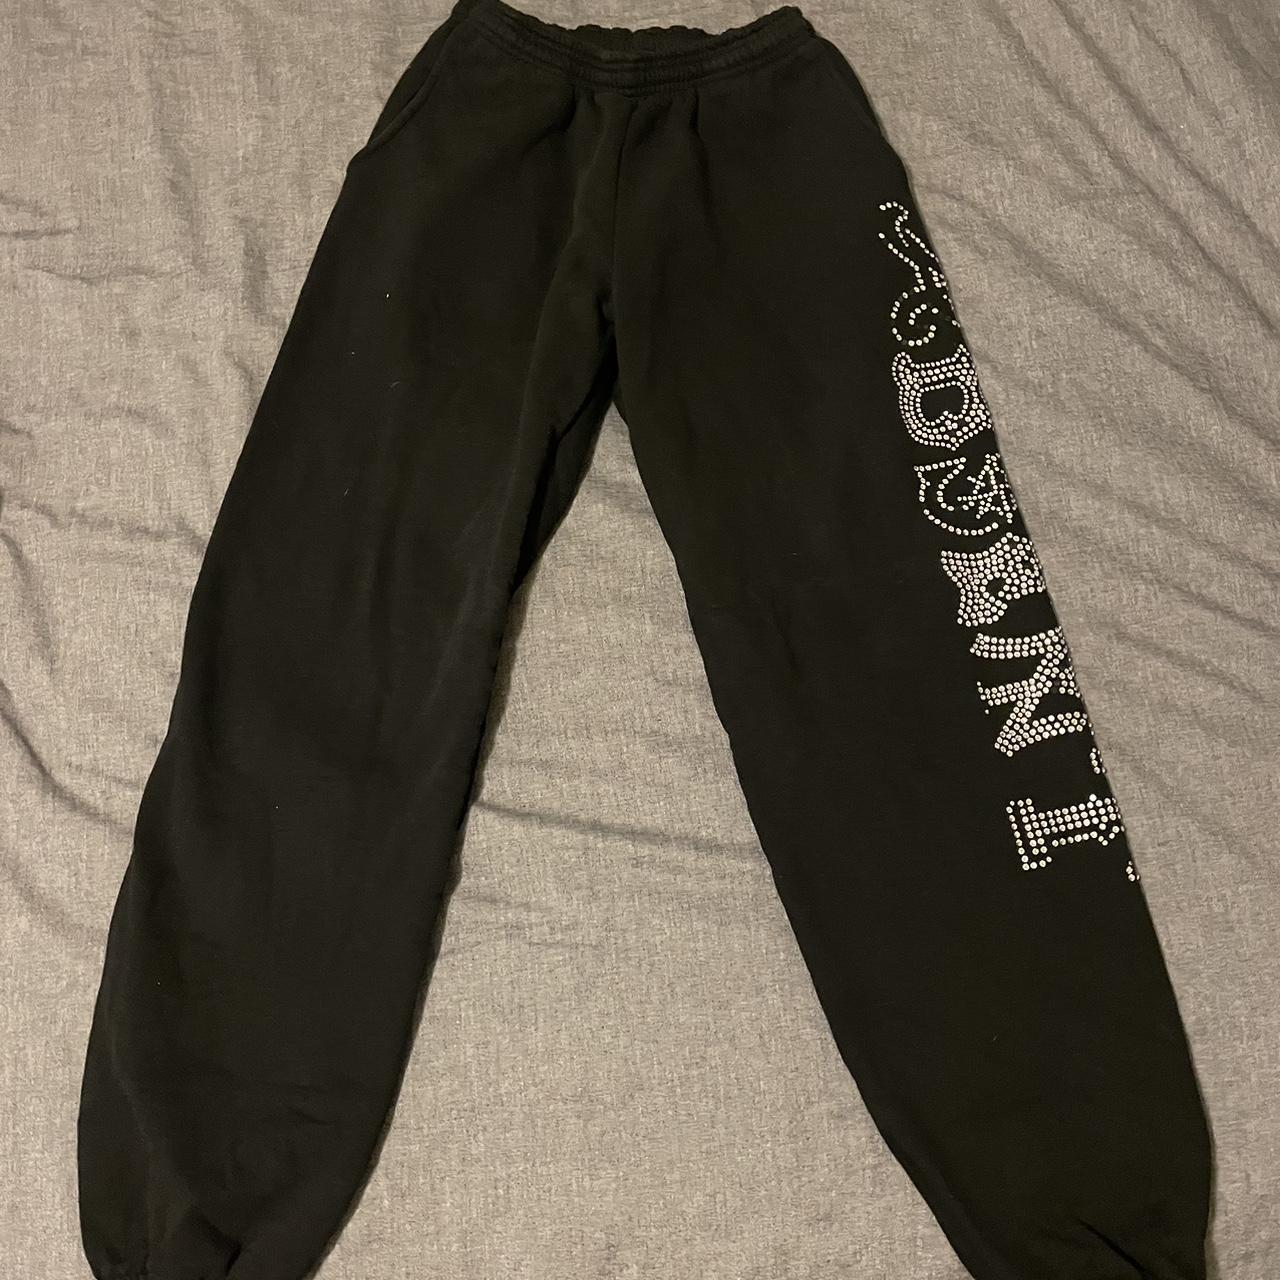 Product Image 1 - Super clean absent sweatpants!! Missing